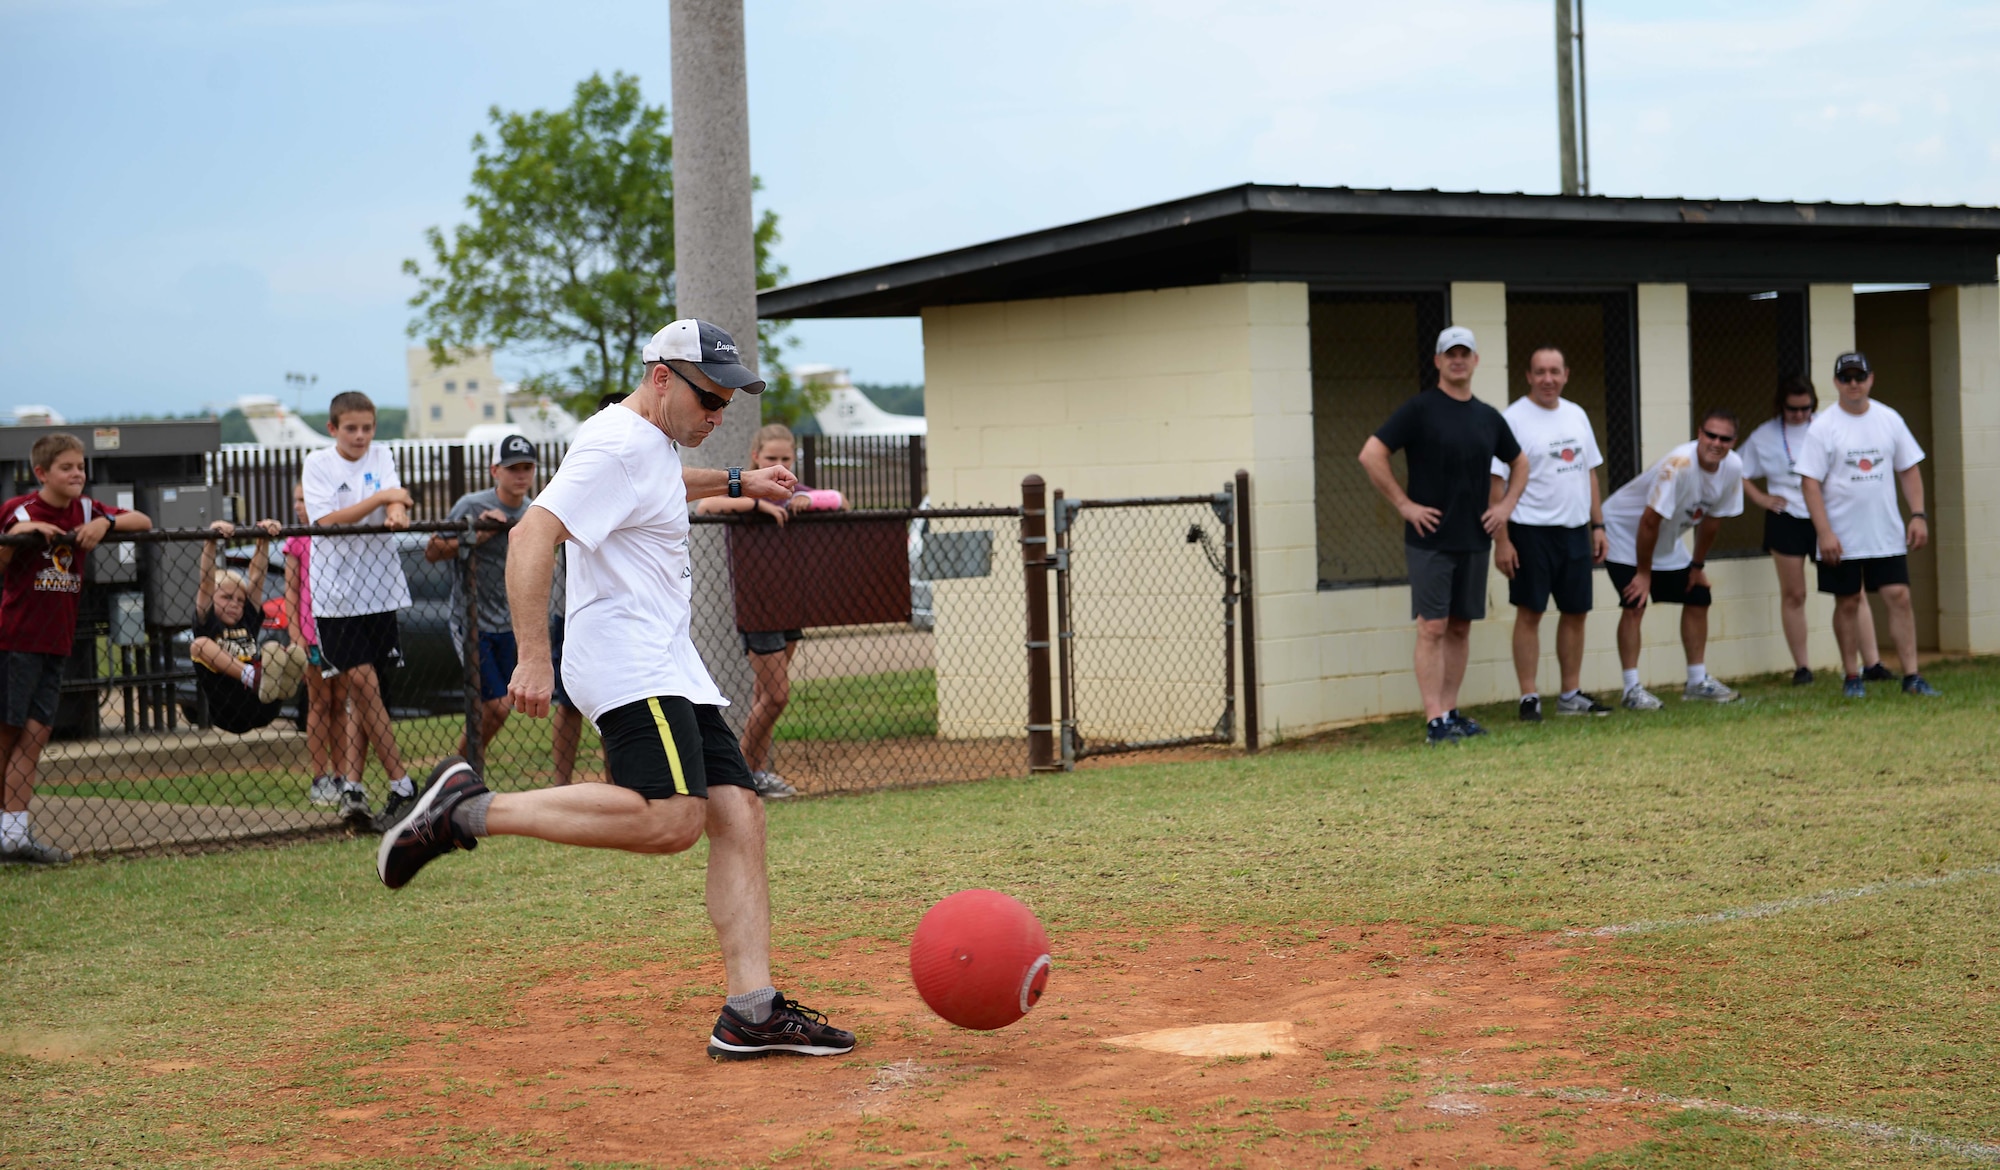 Col. William Denham, 14th Flying Training Wing vice commander, kicks a ball during the Eagles versus the Chiefs kickball game July 3, 2018, at BLAZE Fest on Columbus Air Force Base, Miss. In a close competitive match, the eagles defeated the chiefs 2-1. (U.S. Air Force photo by Airman 1st Class Hannah Bean)